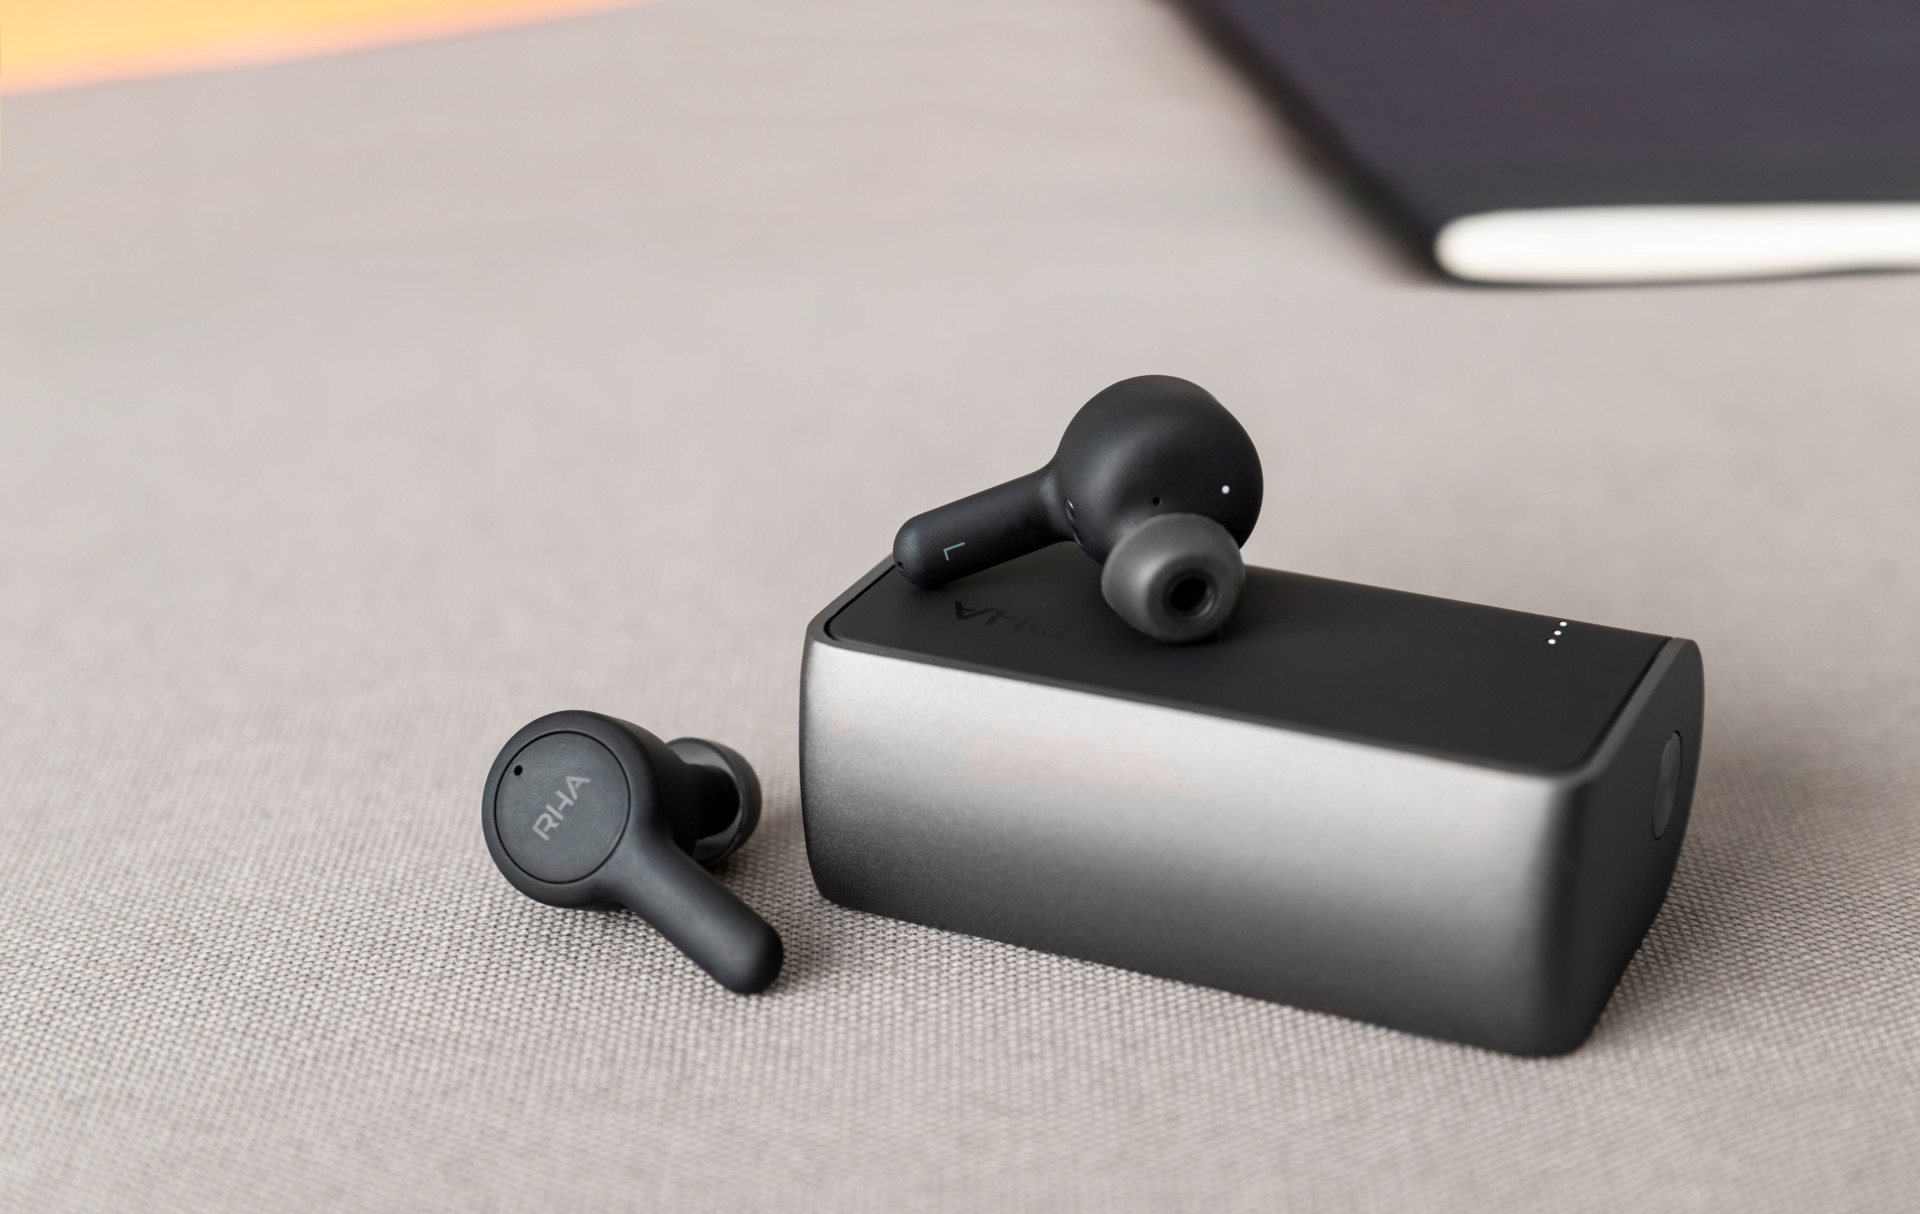 Product image of the RHA TrueConnect true wireless earbuds resting on the included charging case on beige surface.